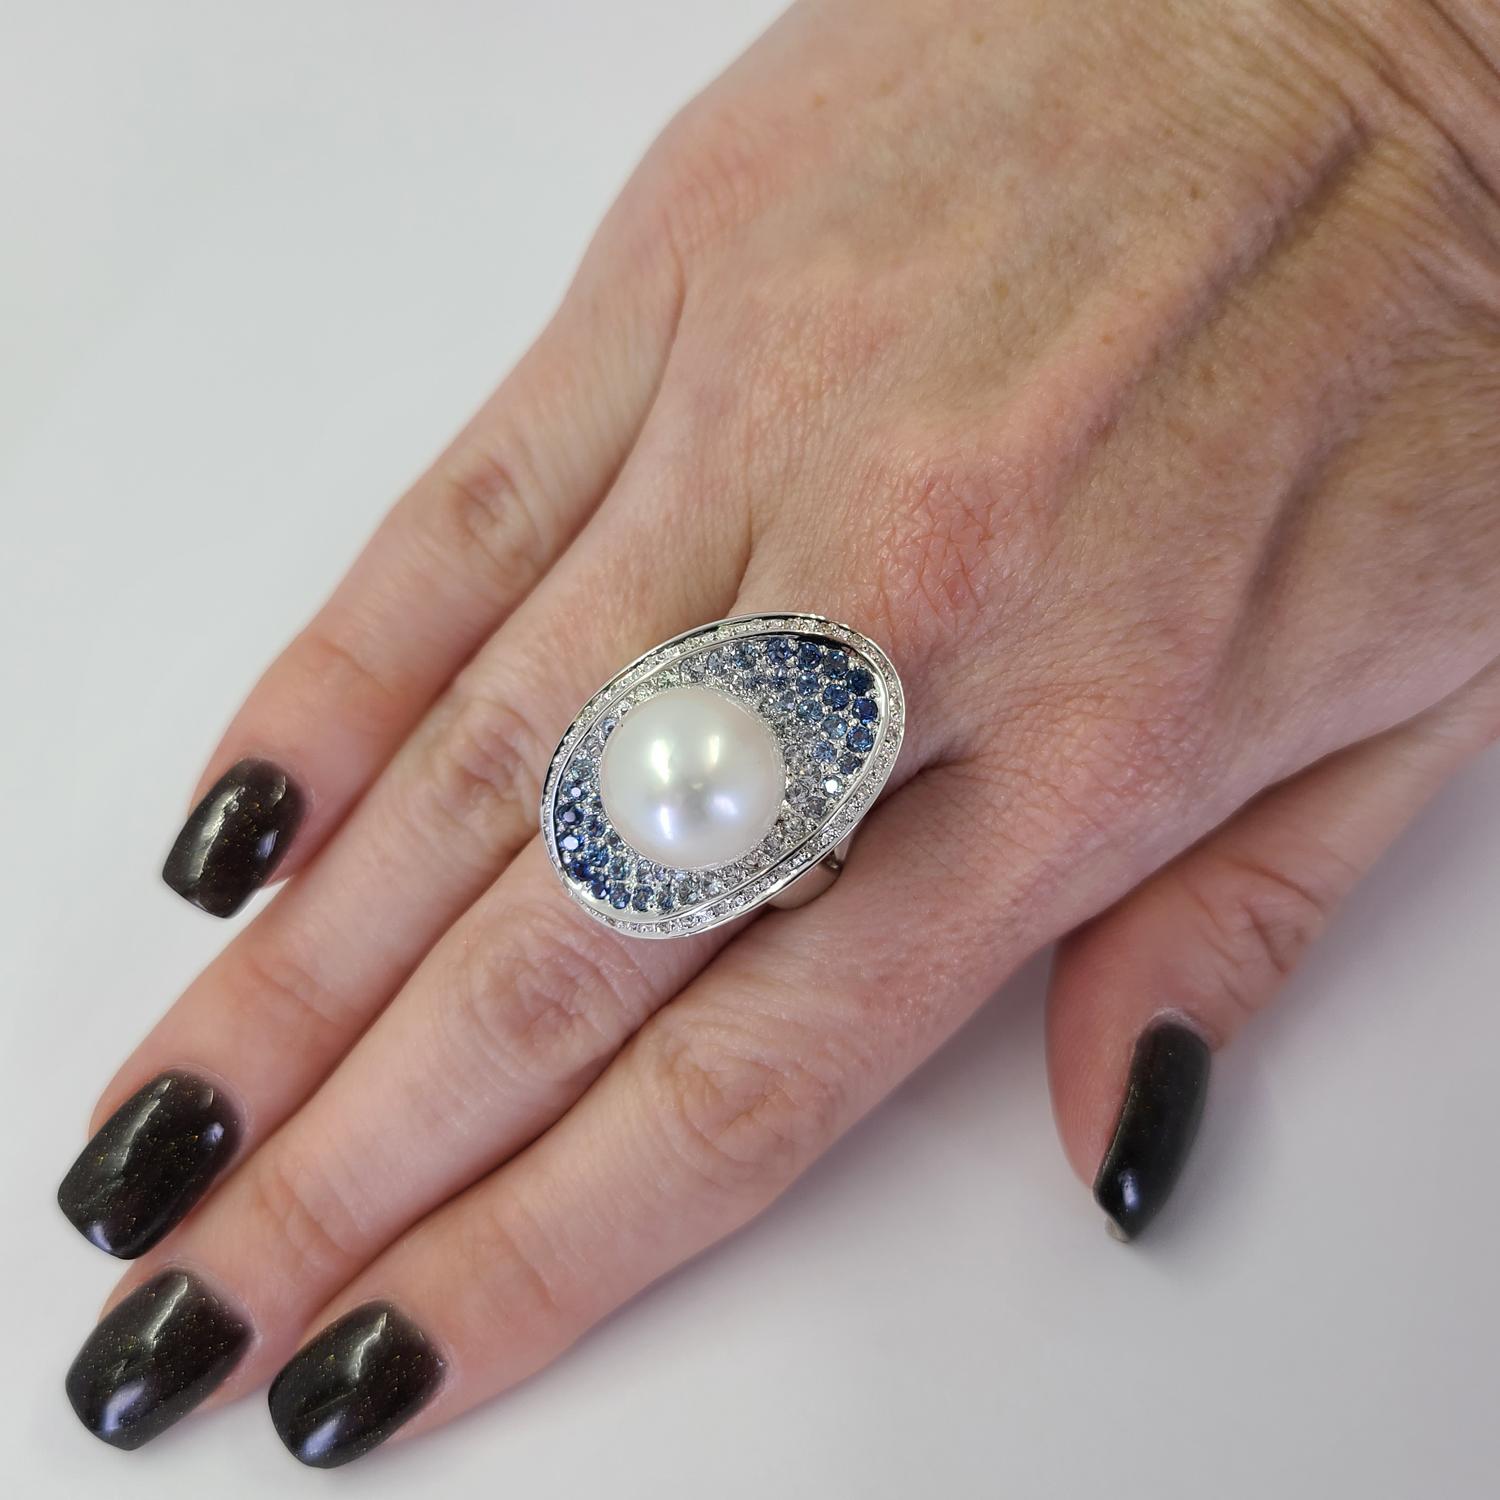 18 Karat White Gold Ring Featuring a 12.7mm South Sea Cultured Pearl, 2 Carat Total Weight Ombre Sapphires, & 0.15 Carat Total Weight Diamonds. Protective Concave Design With Openwork Sides. Finger Size 8.25; Purchase Includes One Sizing Service.